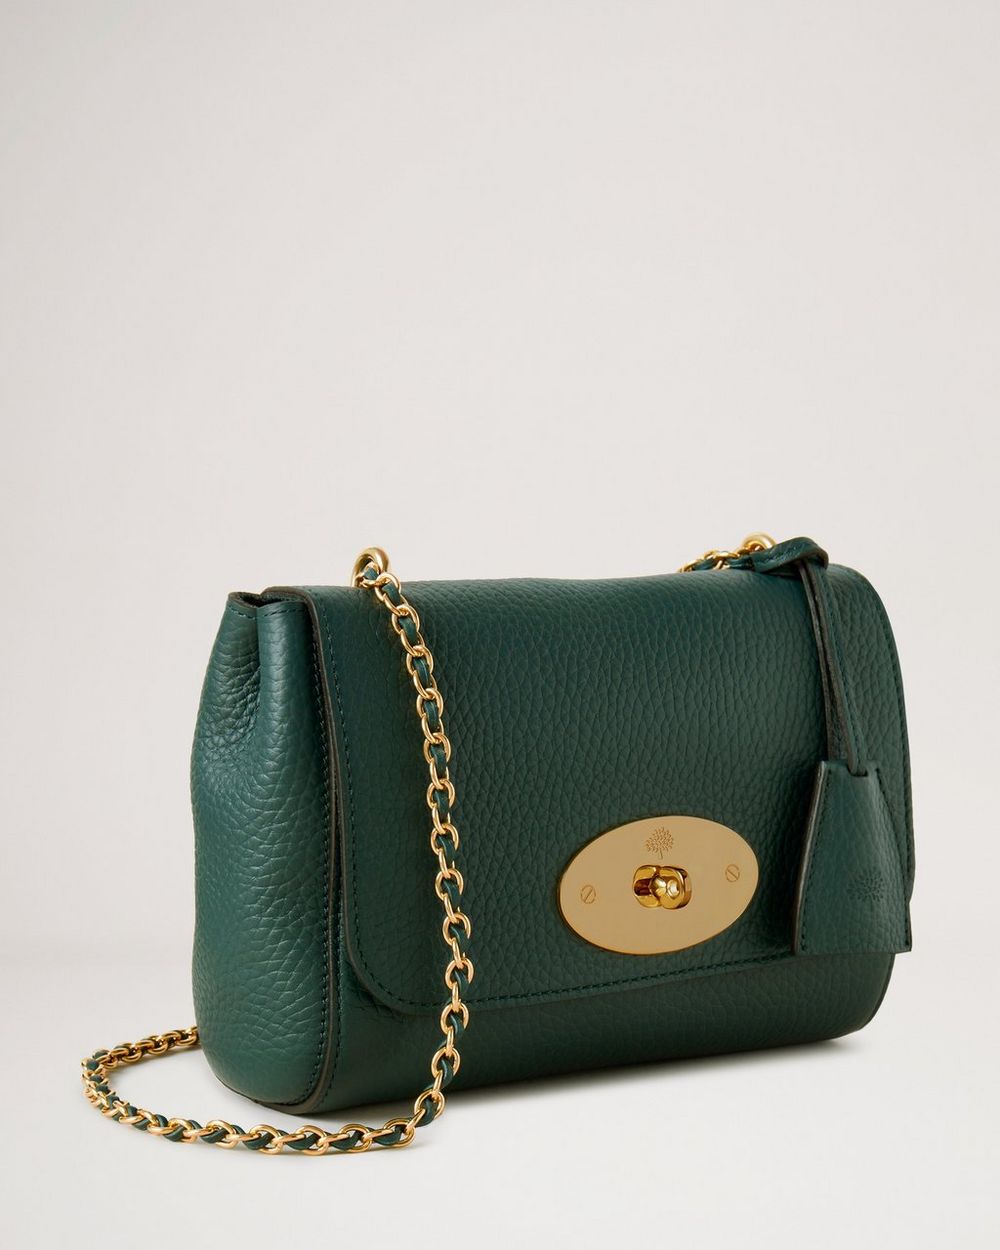 9 Popular Designs of Mulberry Bags - Latest Collection